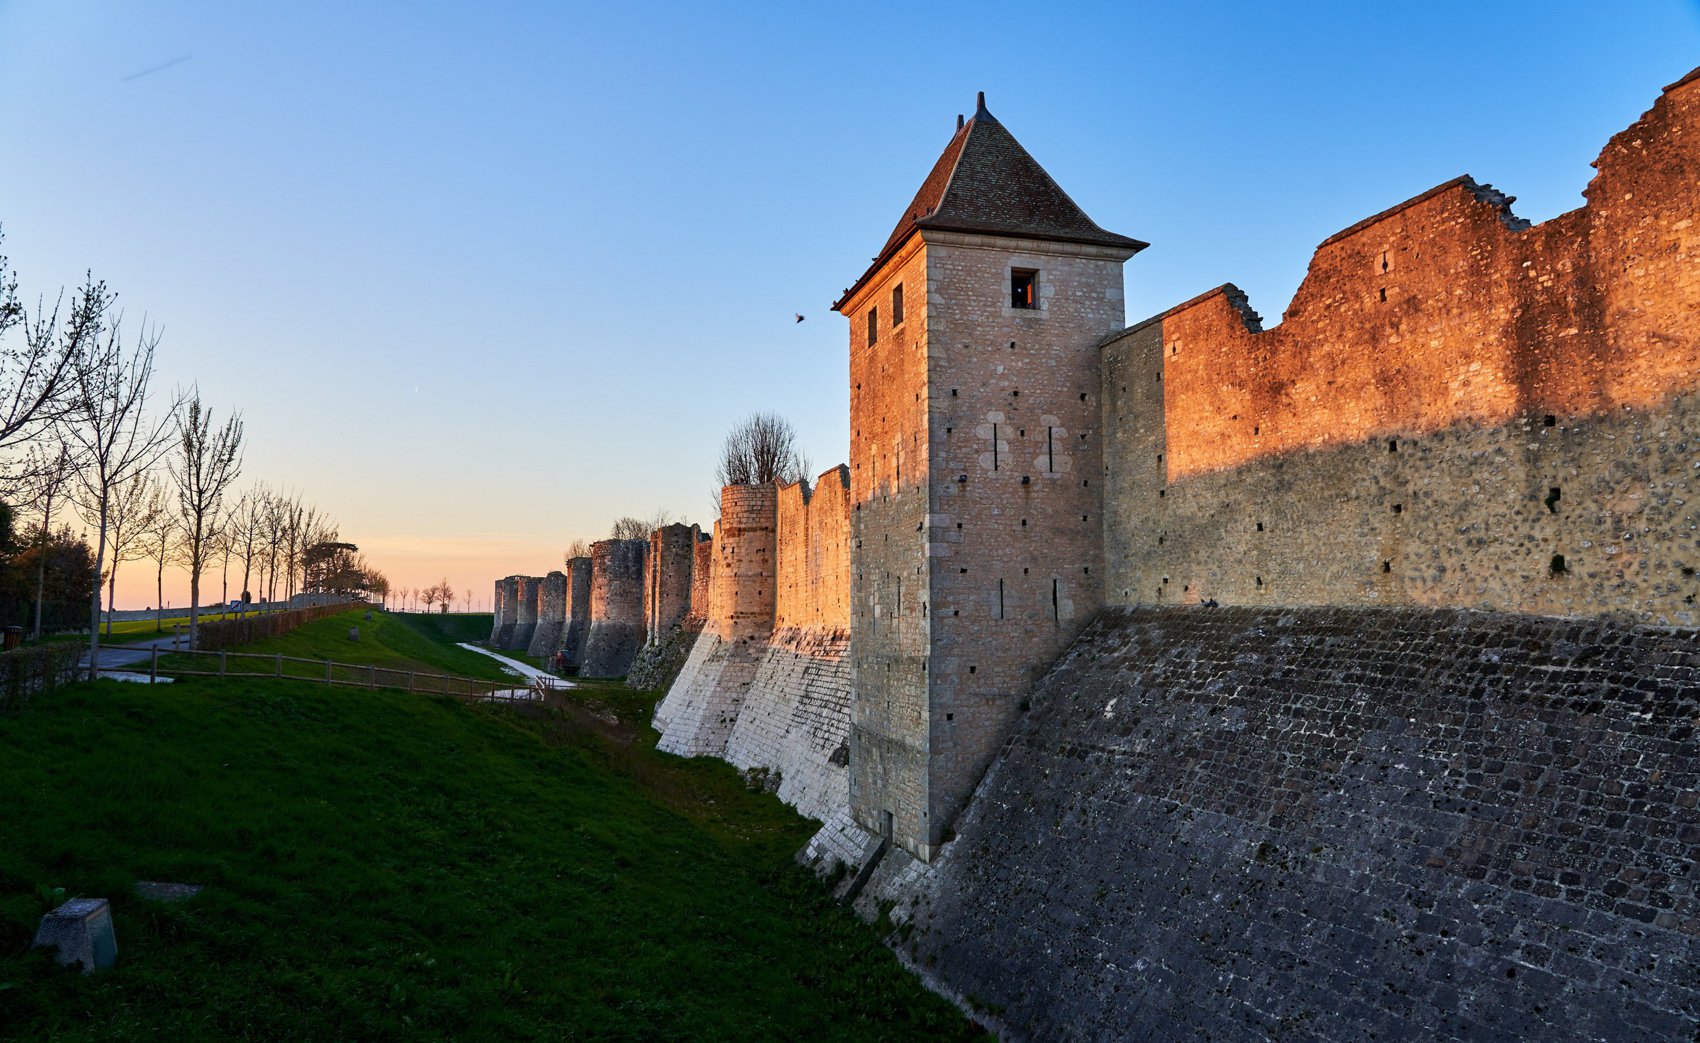 Hero Image for Provins (Medieval Walls, Flowers, Gardens, and Old Town), Spring 201903